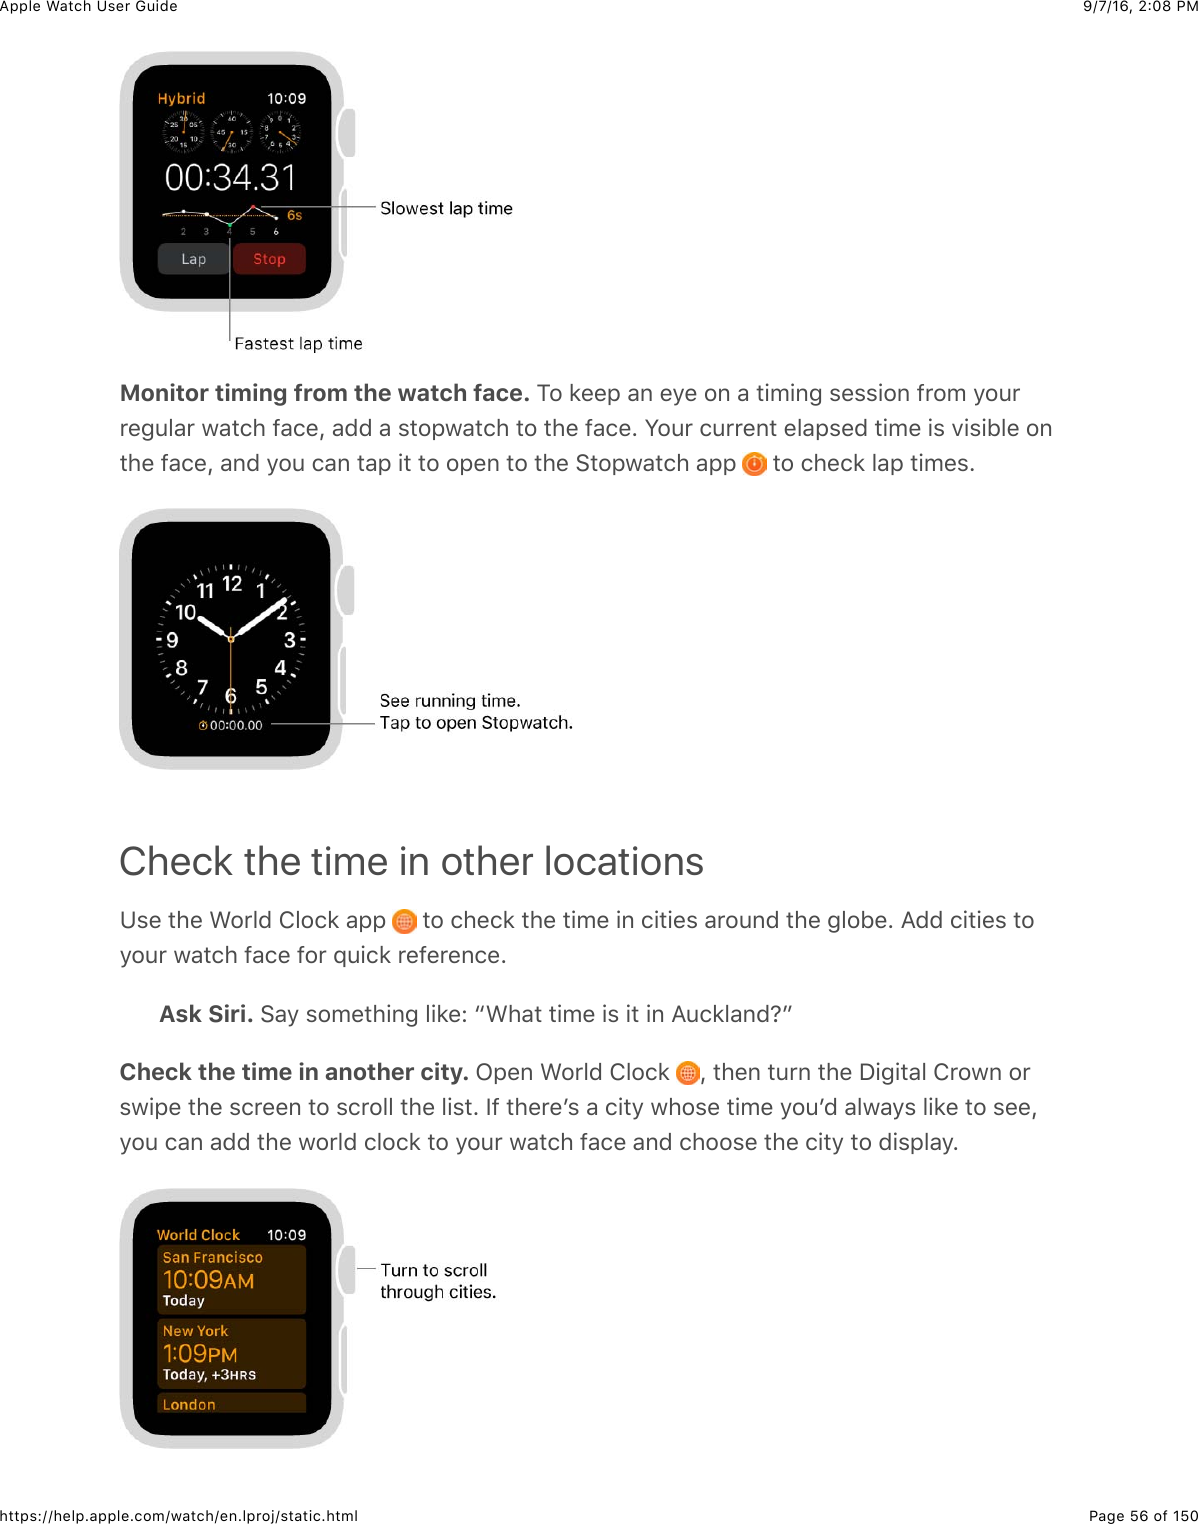 9/7/16, 2)08 PMApple Watch User GuidePage 56 of 150https://help.apple.com/watch/en.lproj/static.htmlMonitor timing from the watch face. 1#&amp;8%%2&amp;&apos;,&amp;%/%&amp;#,&amp;&apos;&amp;3+5+,-&amp;$%$$+#,&amp;@*#5&amp;/#4**%-4&quot;&apos;*&amp;7&apos;3()&amp;@&apos;(%J&amp;&apos;00&amp;&apos;&amp;$3#27&apos;3()&amp;3#&amp;3)%&amp;@&apos;(%C&amp;S#4*&amp;(4**%,3&amp;%&quot;&apos;2$%0&amp;3+5%&amp;+$&amp;.+$+B&quot;%&amp;#,3)%&amp;@&apos;(%J&amp;&apos;,0&amp;/#4&amp;(&apos;,&amp;3&apos;2&amp;+3&amp;3#&amp;#2%,&amp;3#&amp;3)%&amp;63#27&apos;3()&amp;&apos;22&amp; &amp;3#&amp;()%(8&amp;&quot;&apos;2&amp;3+5%$CCheck the time in other locationsK$%&amp;3)%&amp;&gt;#*&quot;0&amp;!&quot;#(8&amp;&apos;22&amp; &amp;3#&amp;()%(8&amp;3)%&amp;3+5%&amp;+,&amp;(+3+%$&amp;&apos;*#4,0&amp;3)%&amp;-&quot;#B%C&amp;=00&amp;(+3+%$&amp;3#/#4*&amp;7&apos;3()&amp;@&apos;(%&amp;@#*&amp;X4+(8&amp;*%@%*%,(%CAsk Siri. 6&apos;/&amp;$#5%3)+,-&amp;&quot;+8%e&amp;a&gt;)&apos;3&amp;3+5%&amp;+$&amp;+3&amp;+,&amp;=4(8&quot;&apos;,0:bCheck the time in another city. L2%,&amp;&gt;#*&quot;0&amp;!&quot;#(8&amp; J&amp;3)%,&amp;34*,&amp;3)%&amp;I+-+3&apos;&quot;&amp;!*#7,&amp;#*$7+2%&amp;3)%&amp;$(*%%,&amp;3#&amp;$(*#&quot;&quot;&amp;3)%&amp;&quot;+$3C&amp;Y@&amp;3)%*%W$&amp;&apos;&amp;(+3/&amp;7)#$%&amp;3+5%&amp;/#4W0&amp;&apos;&quot;7&apos;/$&amp;&quot;+8%&amp;3#&amp;$%%J/#4&amp;(&apos;,&amp;&apos;00&amp;3)%&amp;7#*&quot;0&amp;(&quot;#(8&amp;3#&amp;/#4*&amp;7&apos;3()&amp;@&apos;(%&amp;&apos;,0&amp;()##$%&amp;3)%&amp;(+3/&amp;3#&amp;0+$2&quot;&apos;/C